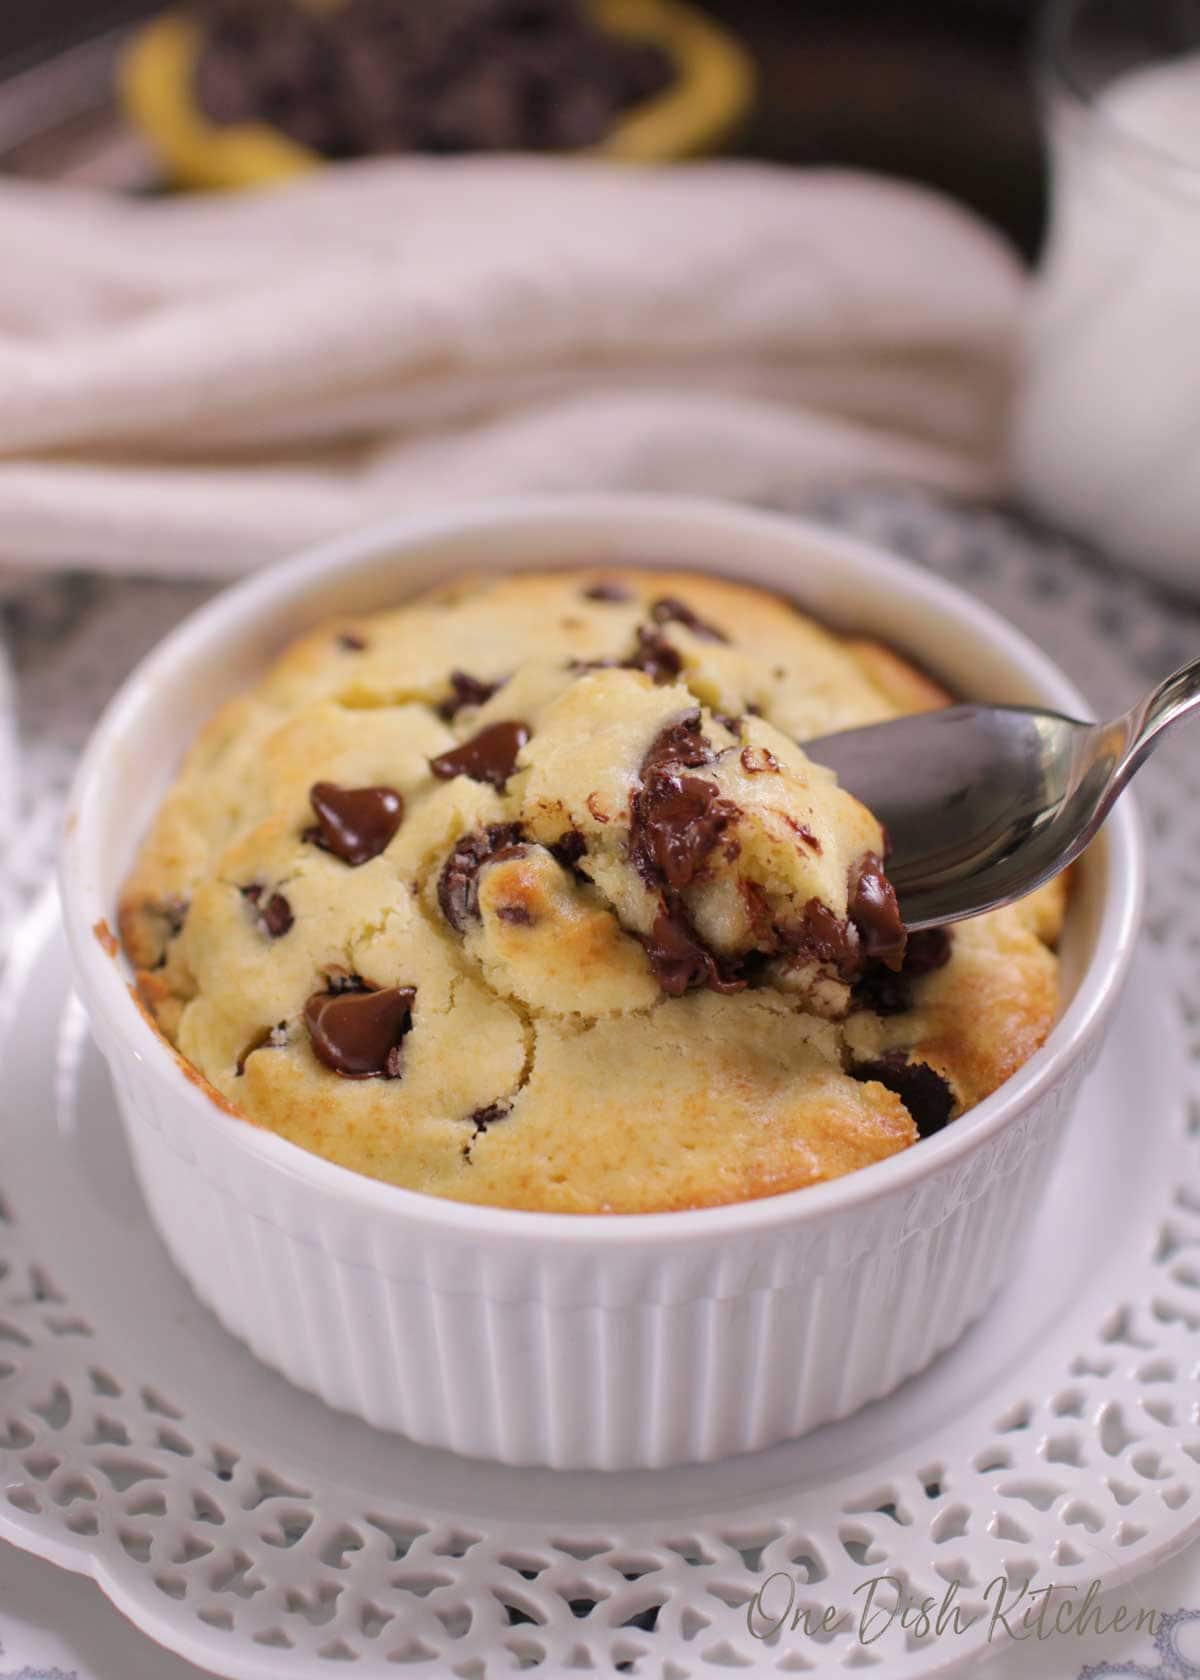 A spoonful of a chocolate chip muffin from a ramekin 